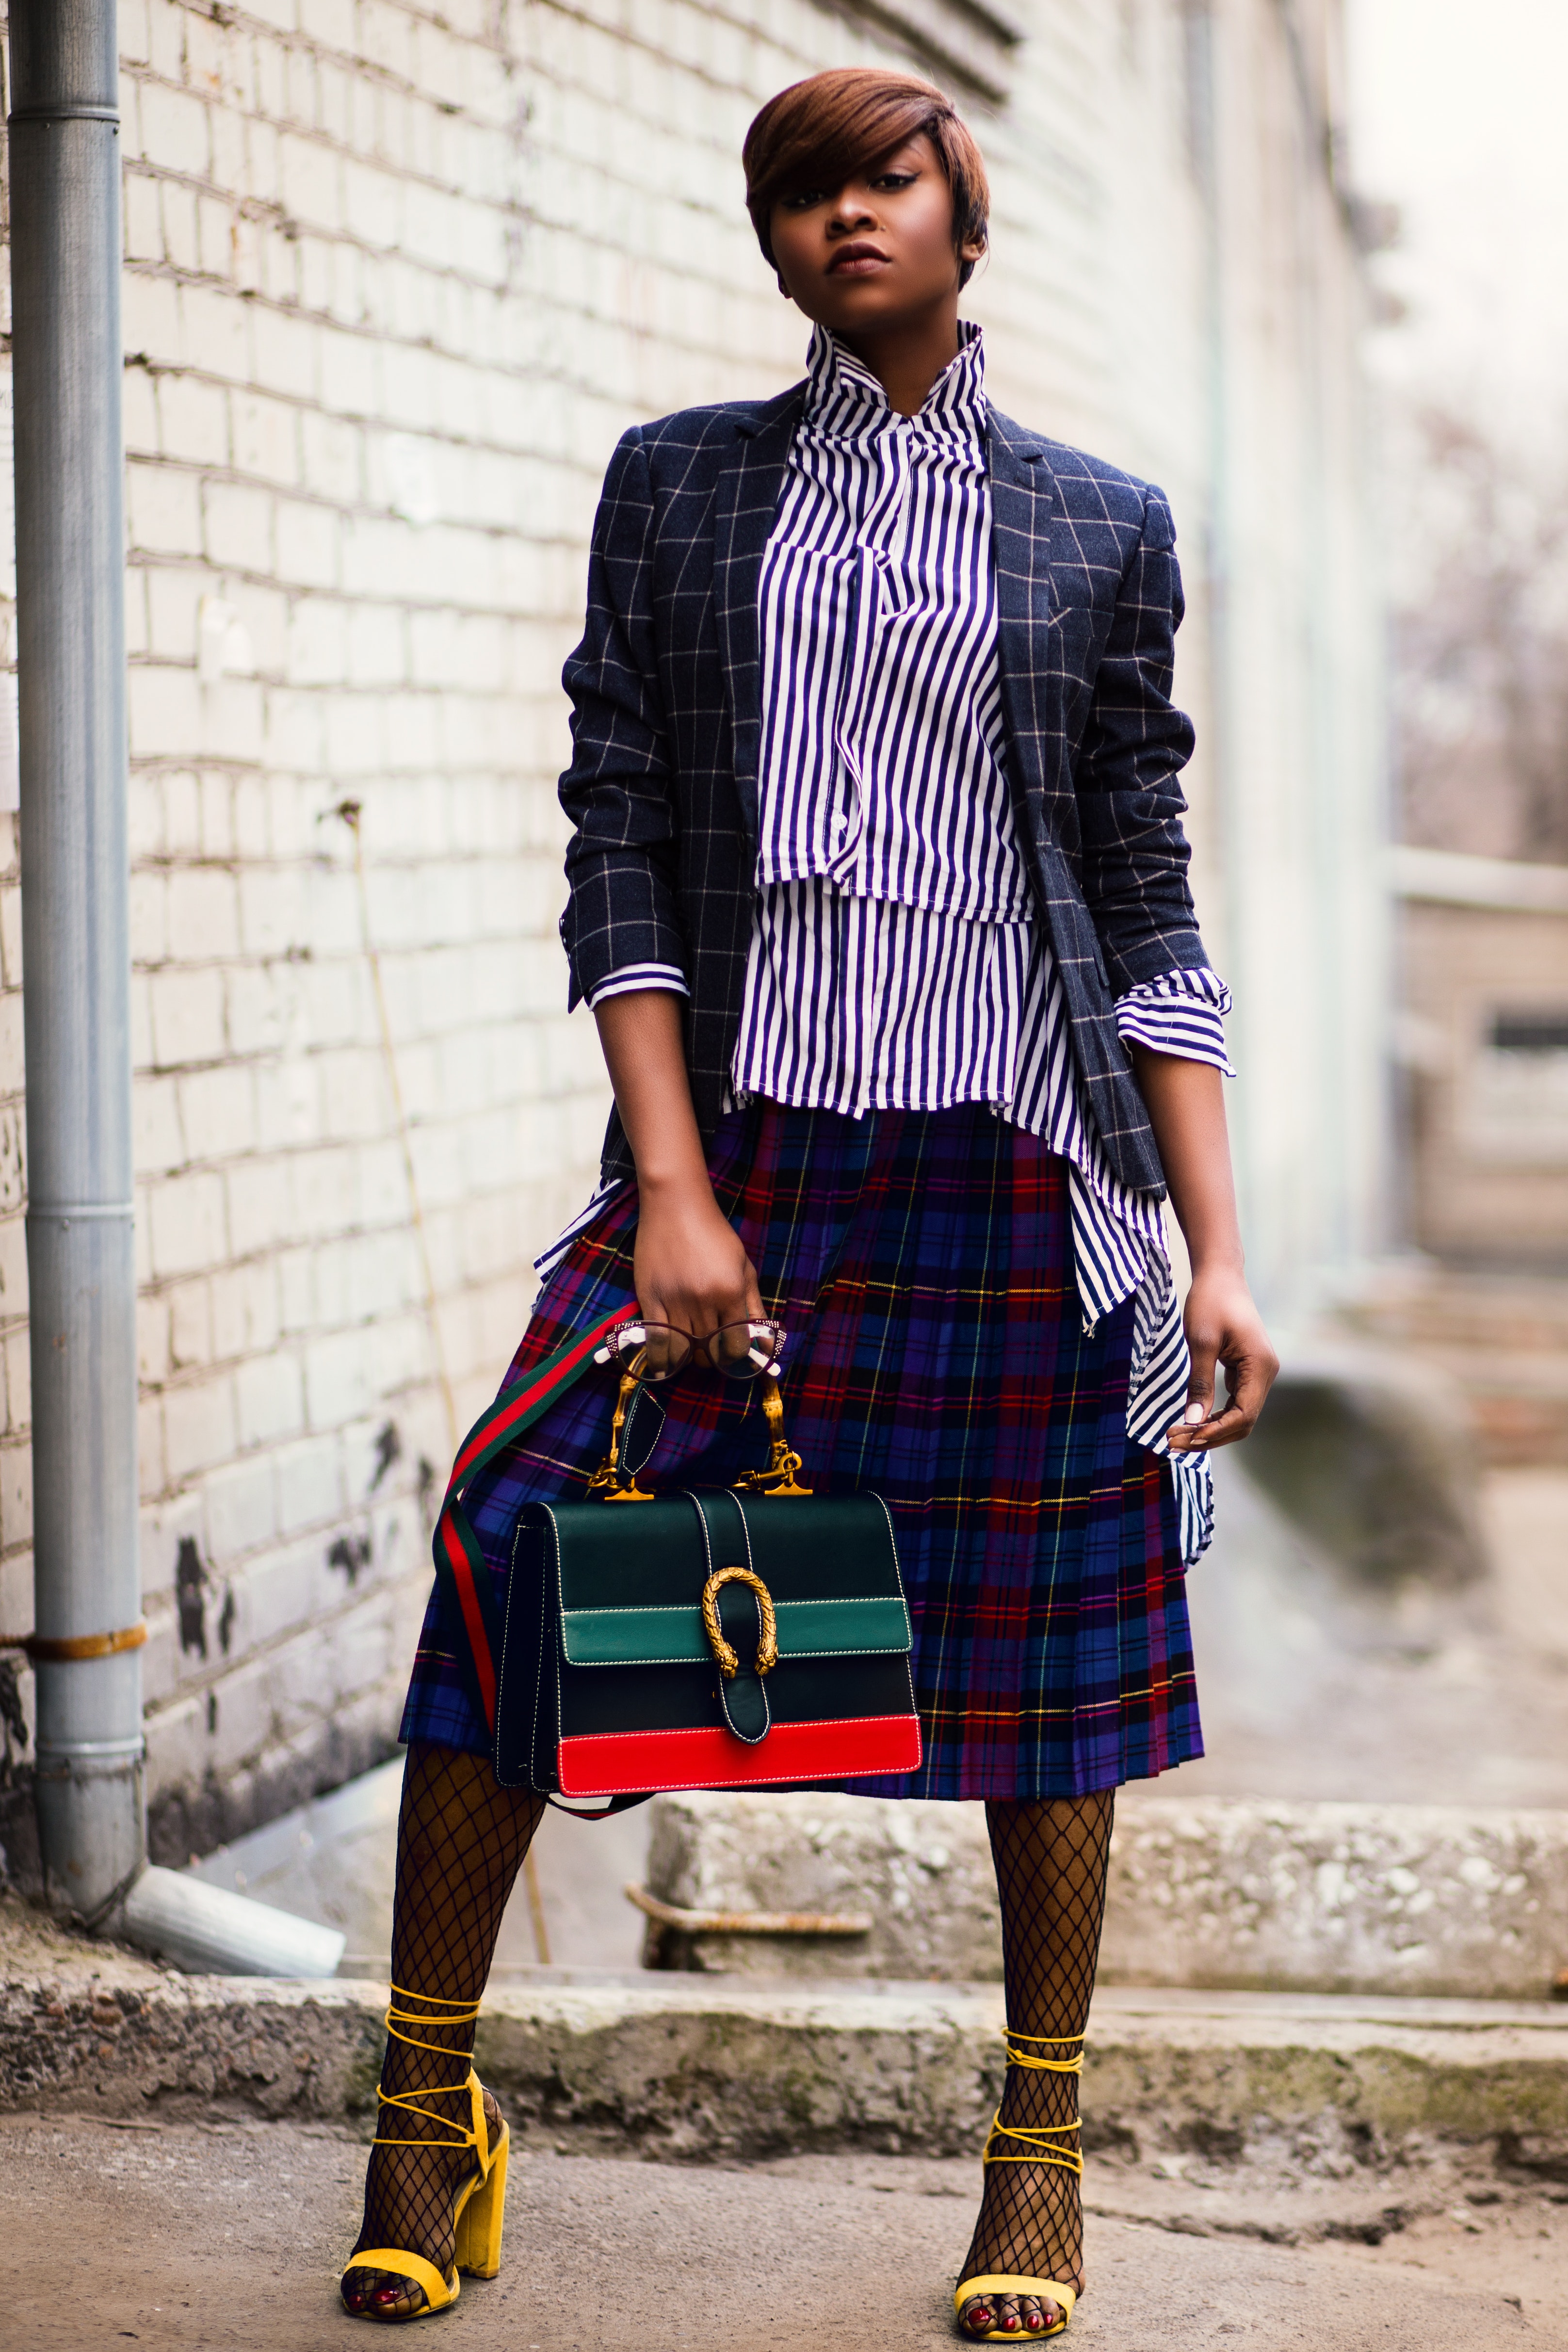 Woman in blue and white plaid cardigan holding green and red handbag photo